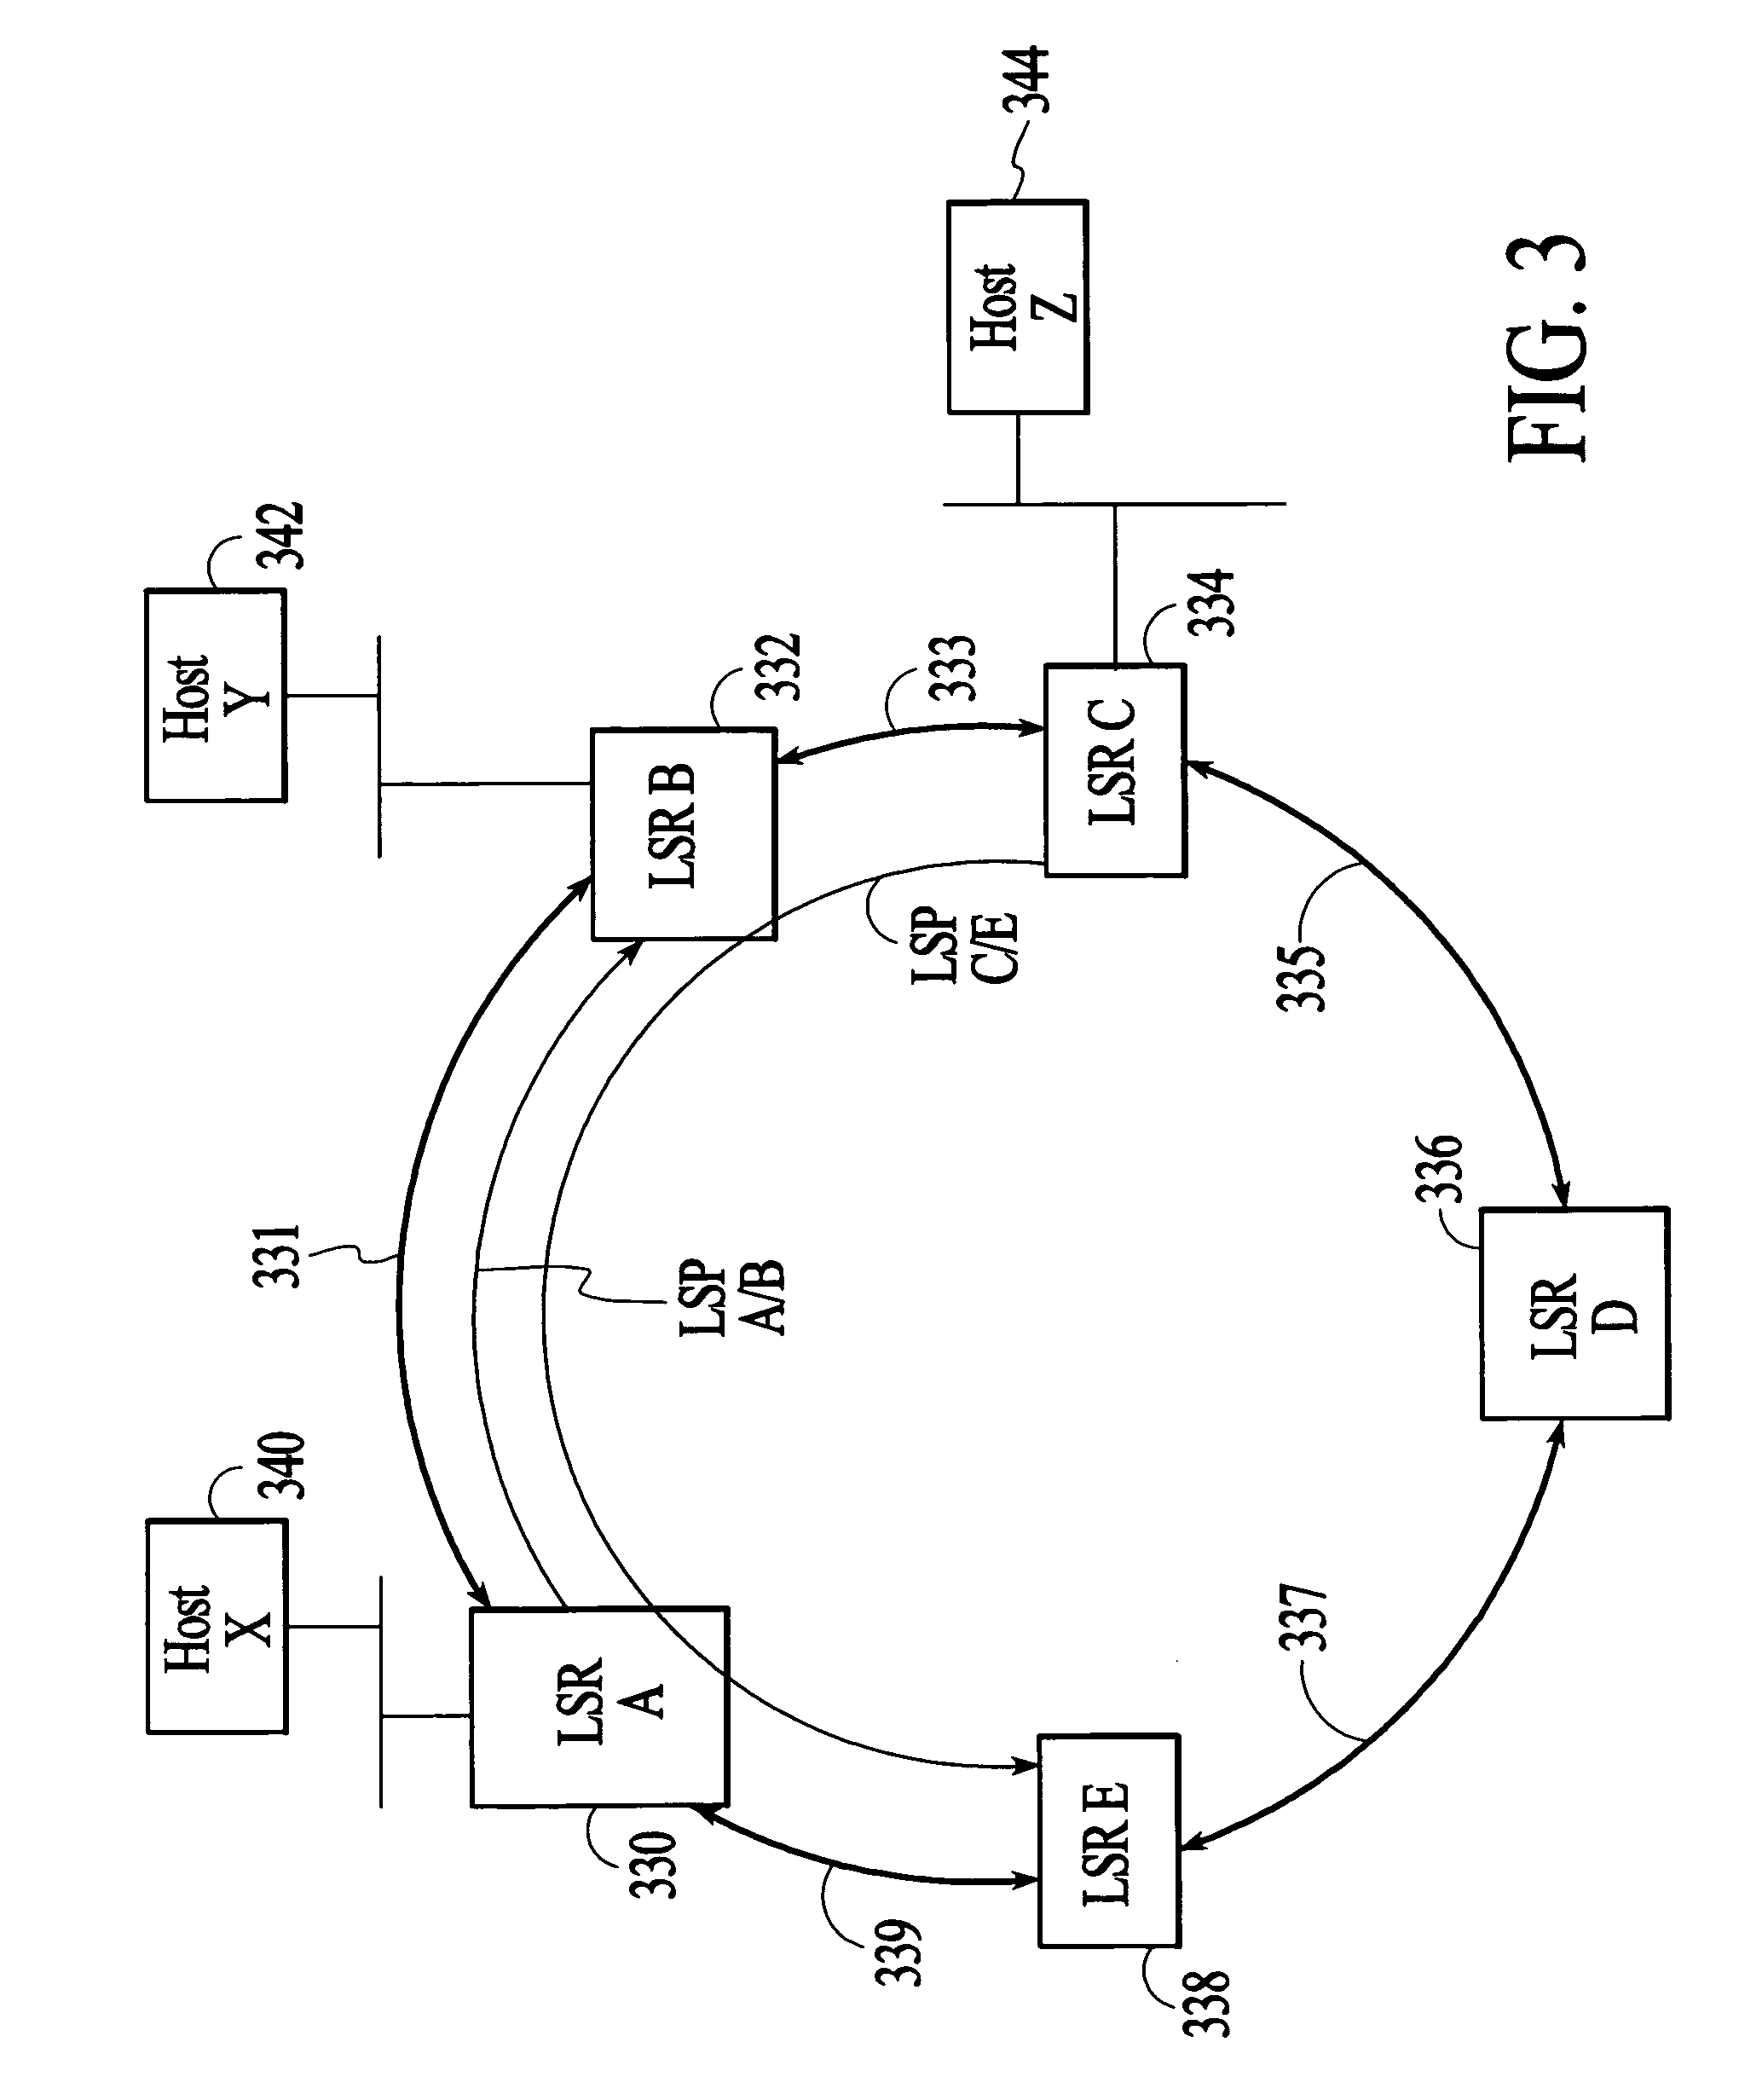 Method and system for providing failure protection in a ring network that utilizes label switching